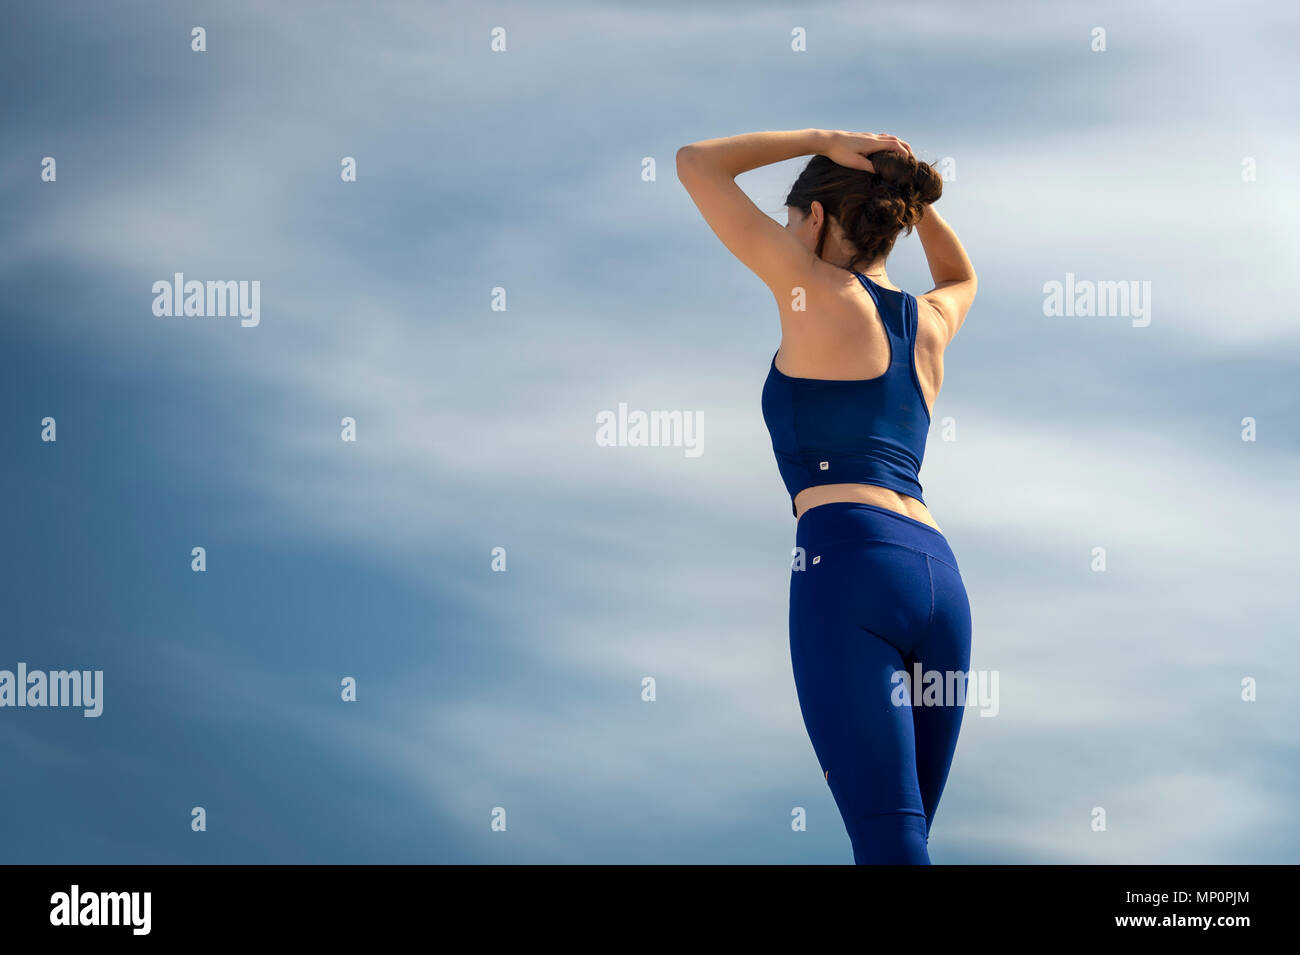 back view of a woman wearing sportswear adjusting her hair before exercising Stock Photo